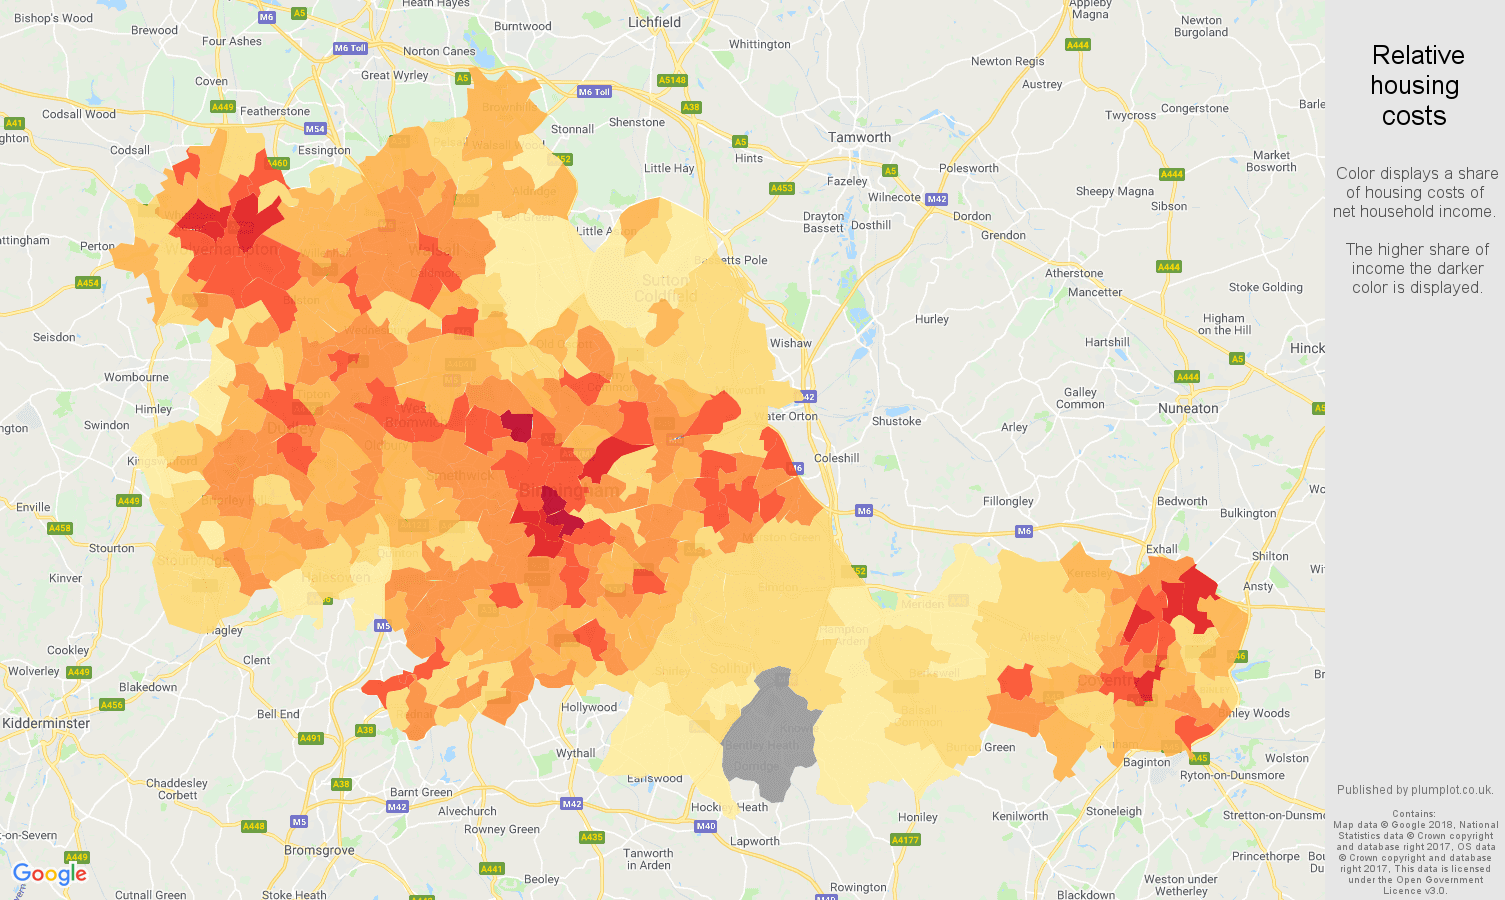 West Midlands county relative housing costs map